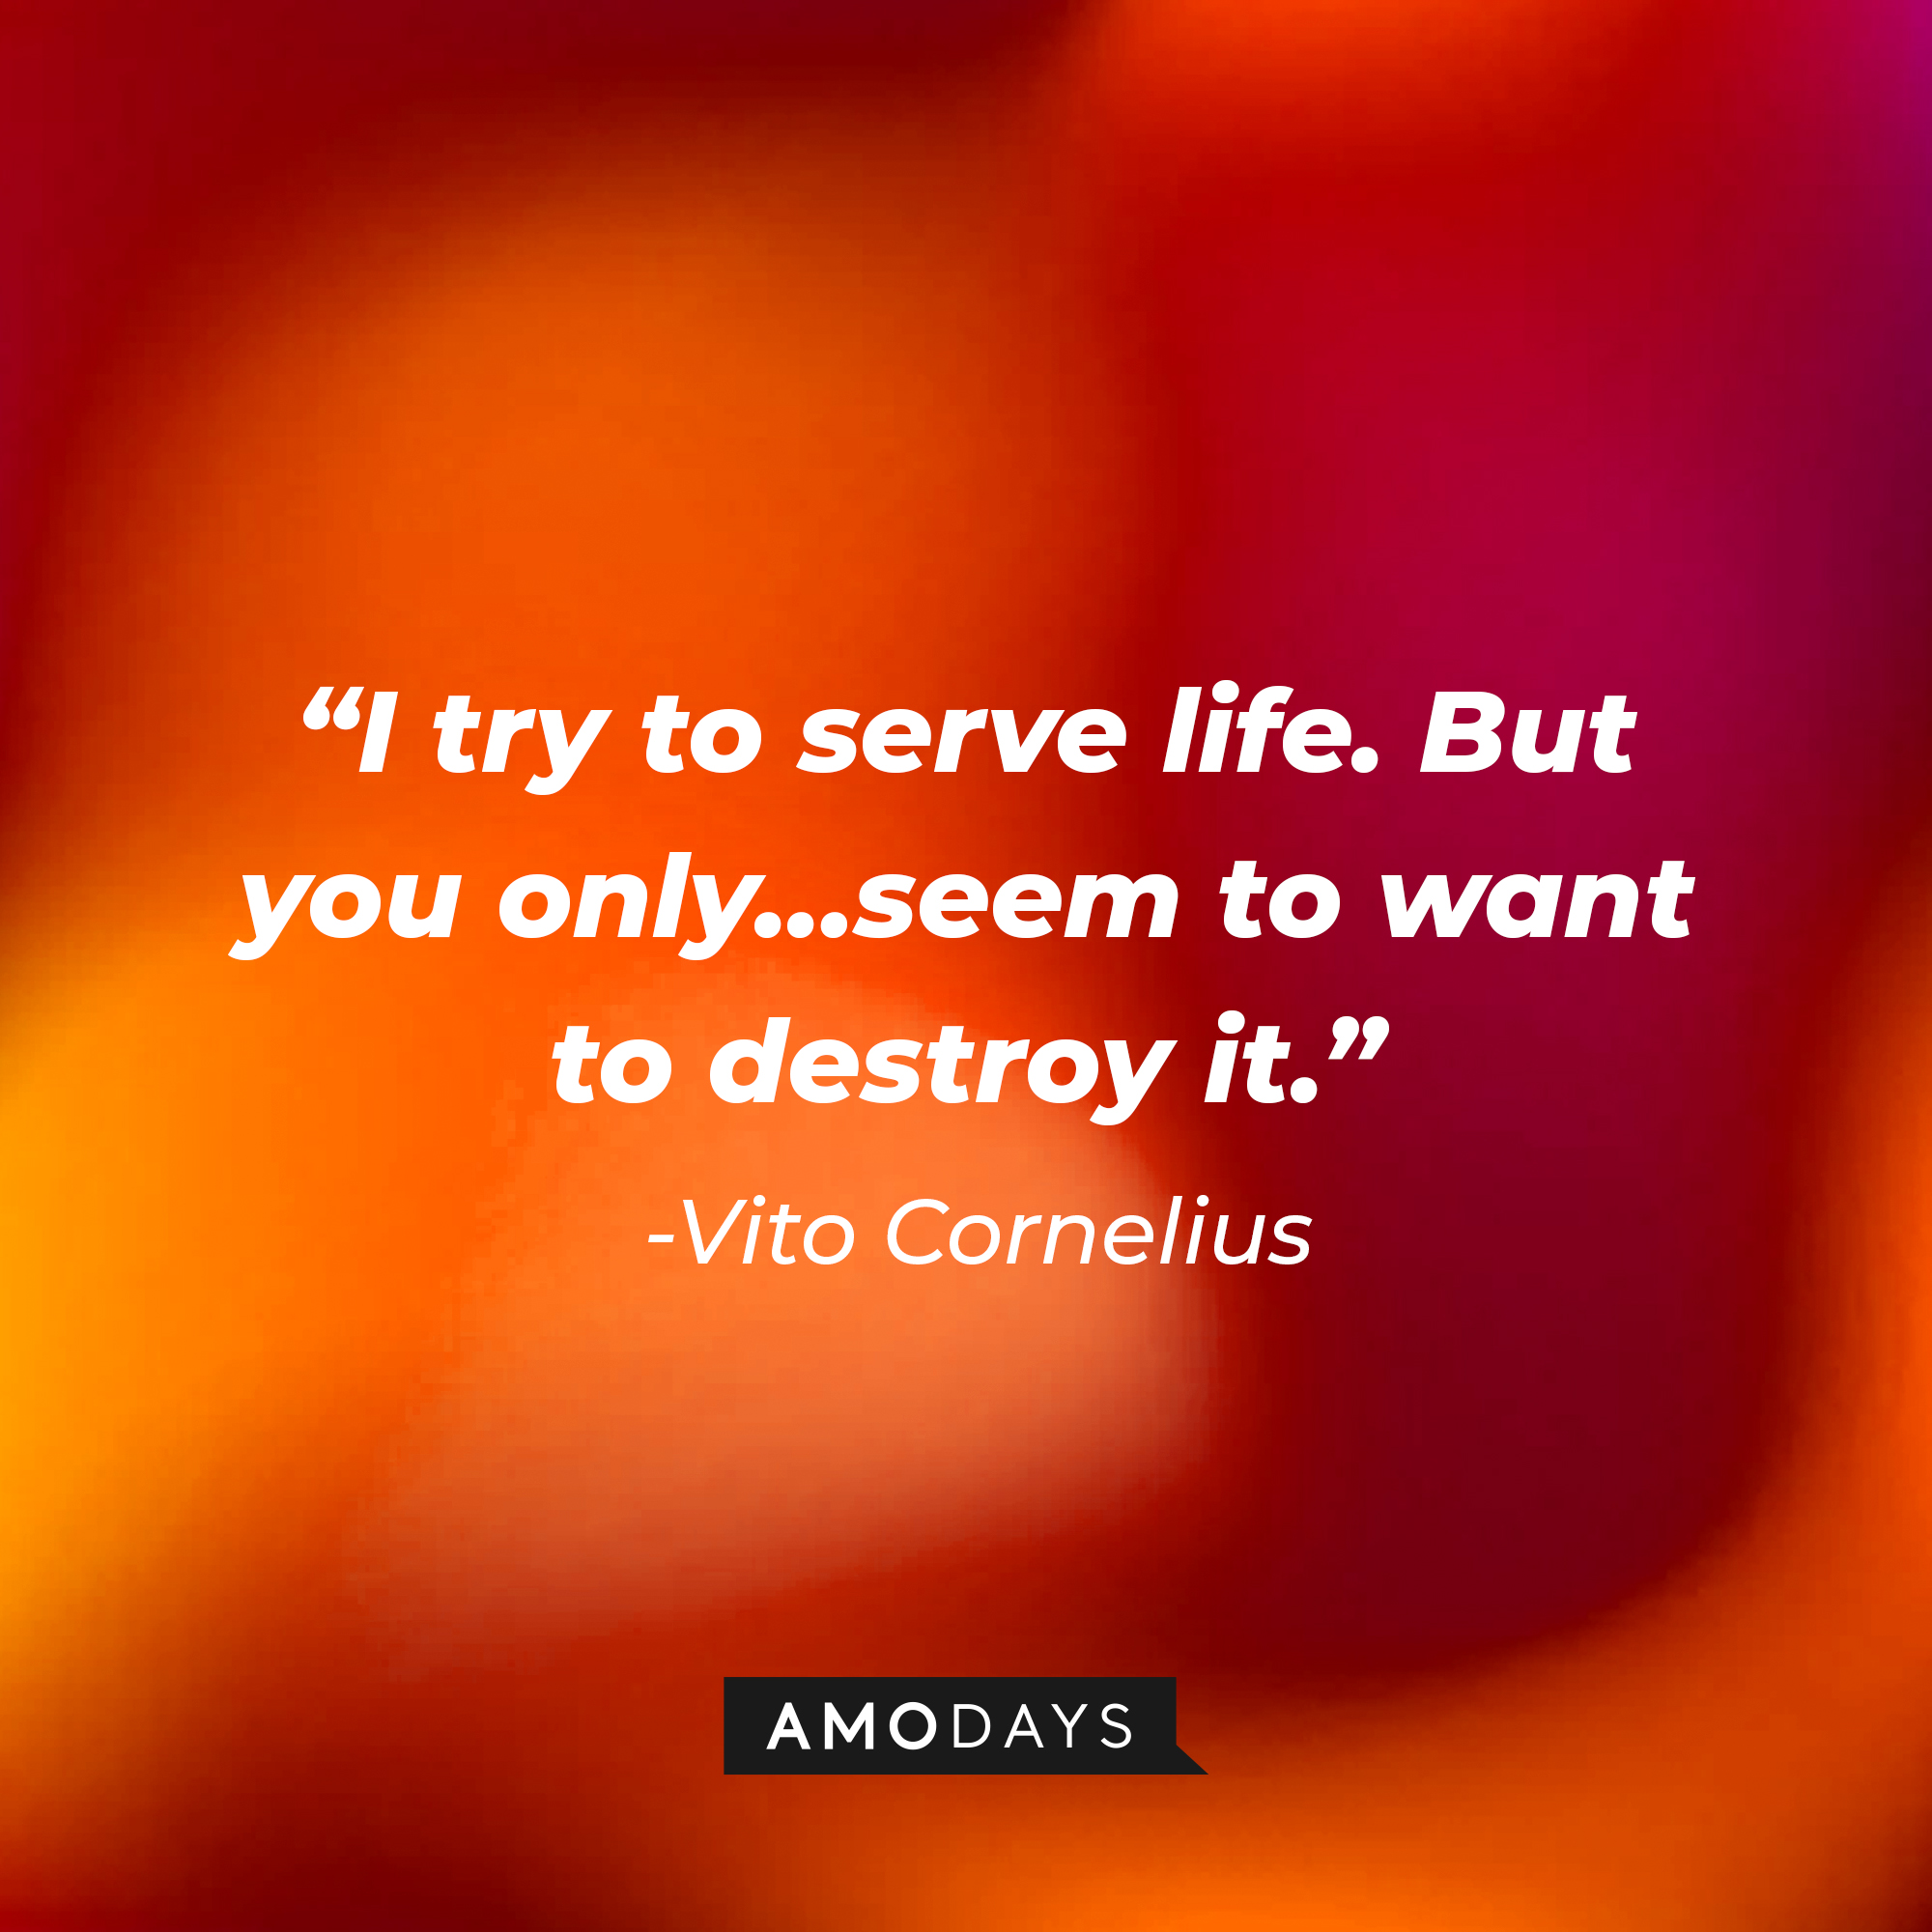 Vito Cornelius' quote: "I try to serve life. But you only...seem to want to destroy it" | Source: Amodays